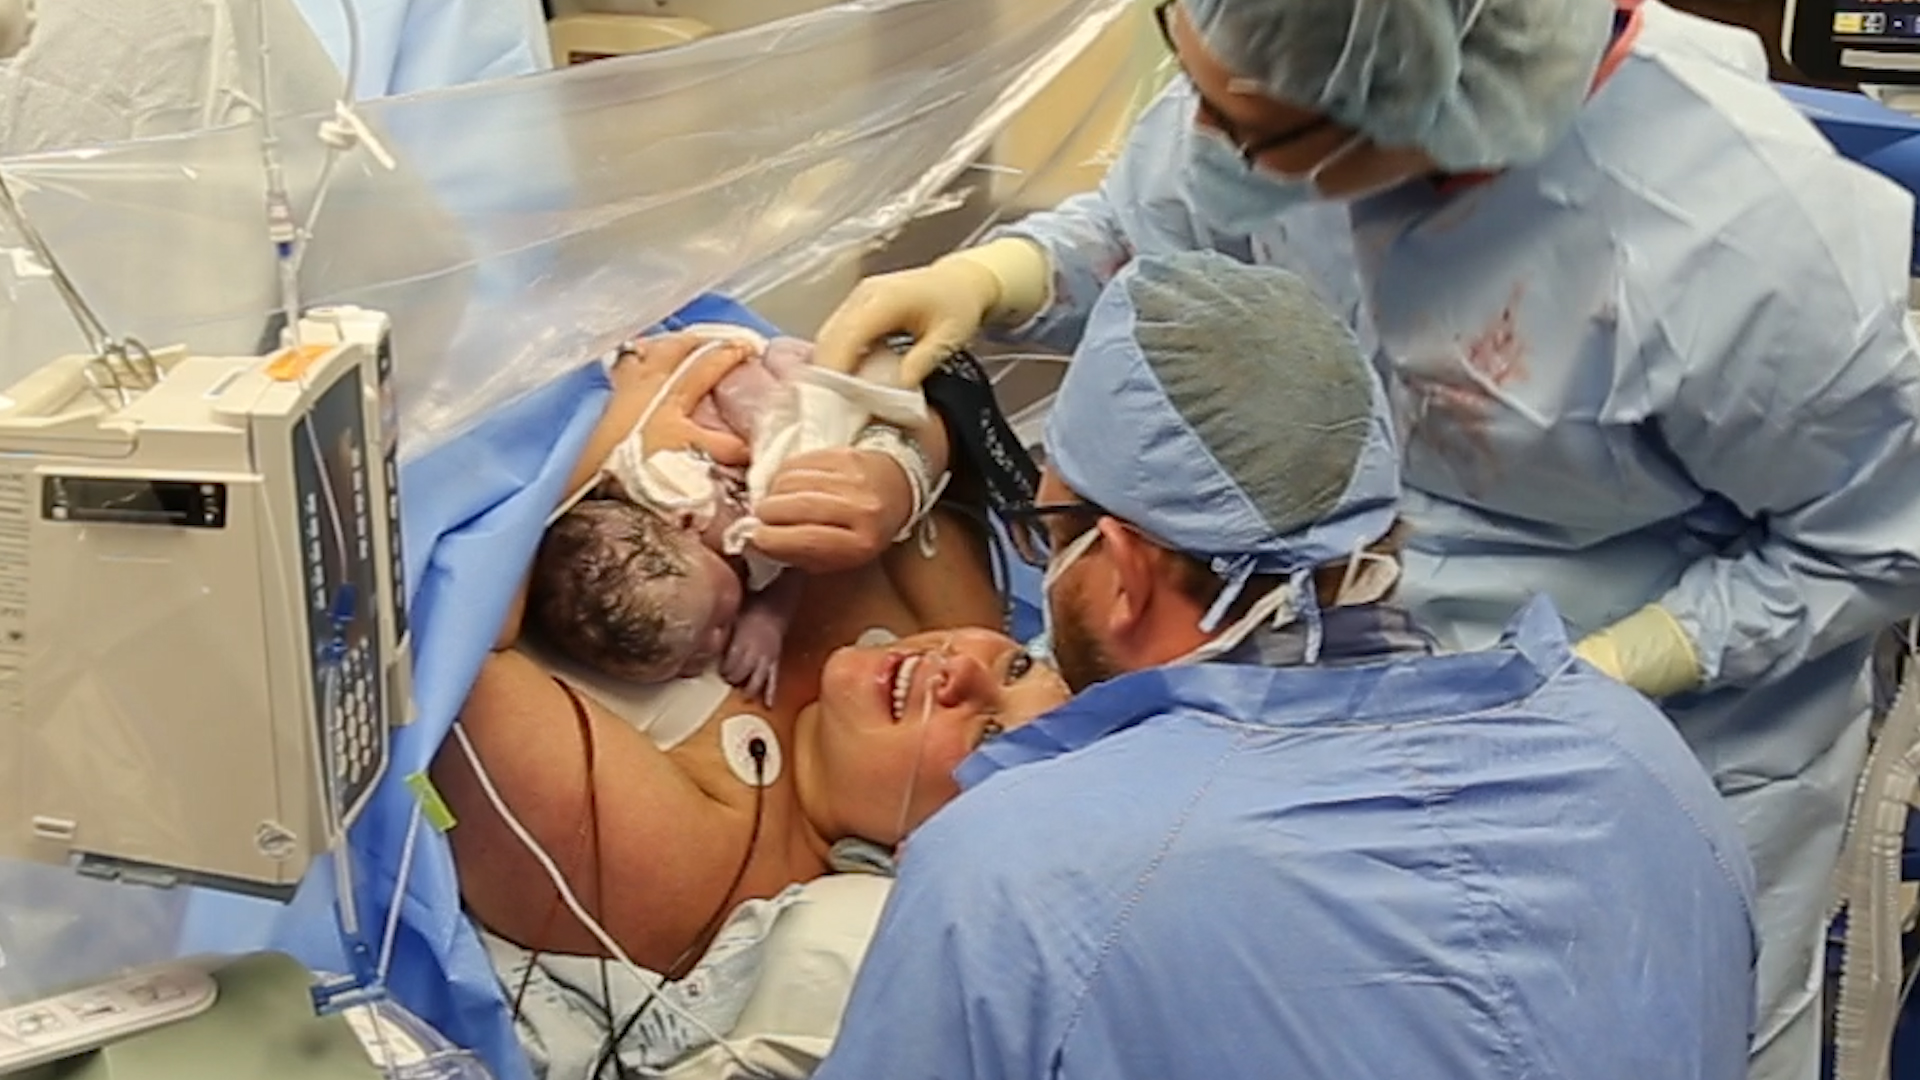 Watch: A C-section Delivery - St. Luke's Birthing Center